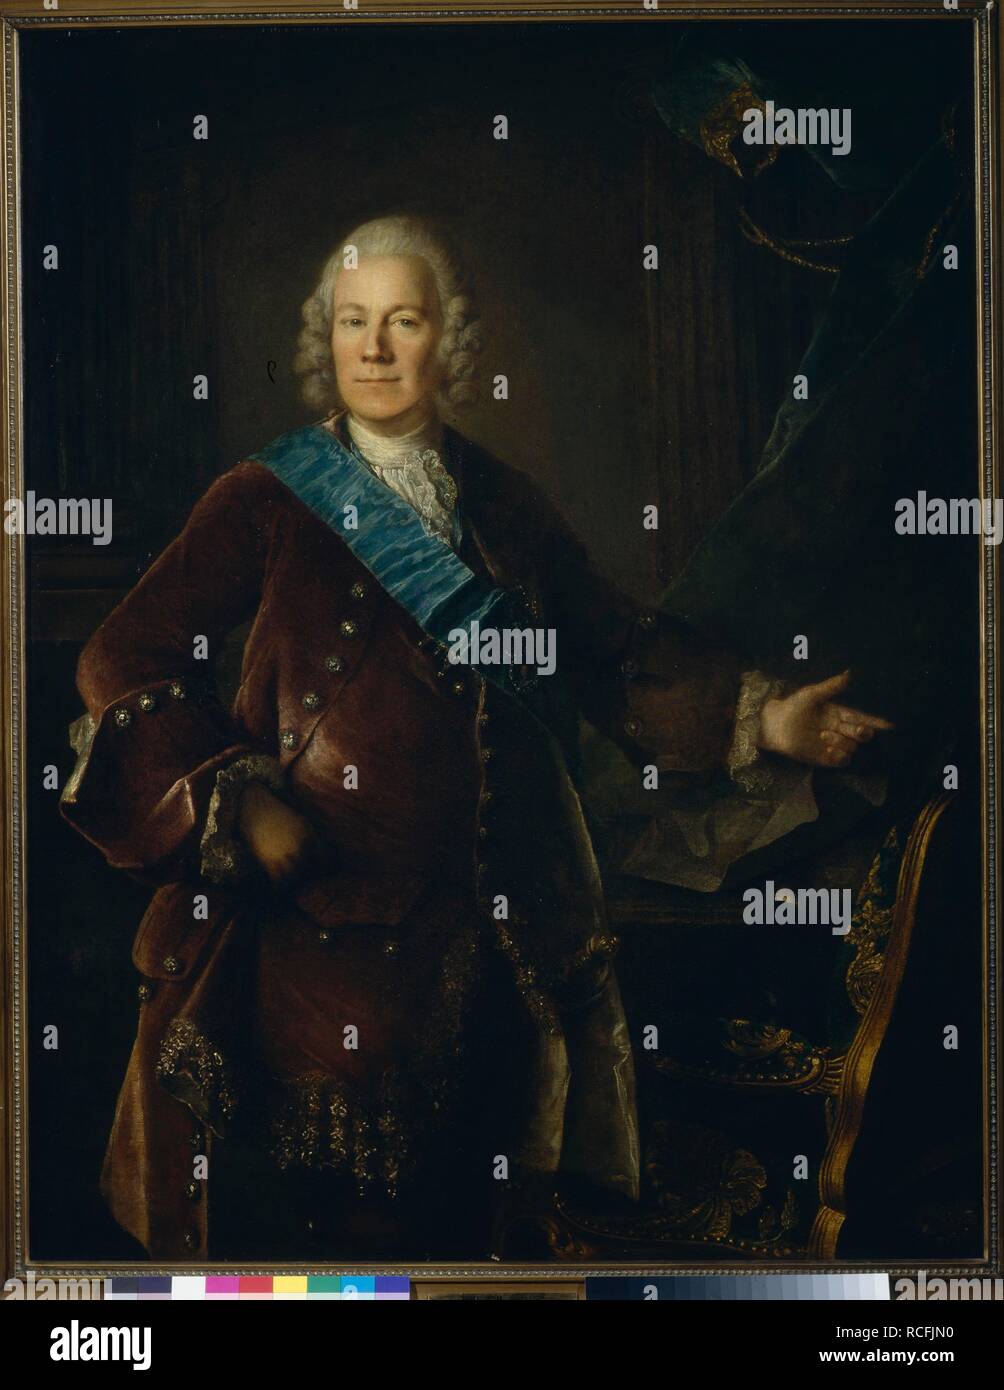 Portrait of Count Alexey Petrovich Bestuzhev-Ryumin (1693-1766). Museum: State Tretyakov Gallery, Moscow. Author: TOCQUE, LOUIS. Stock Photo